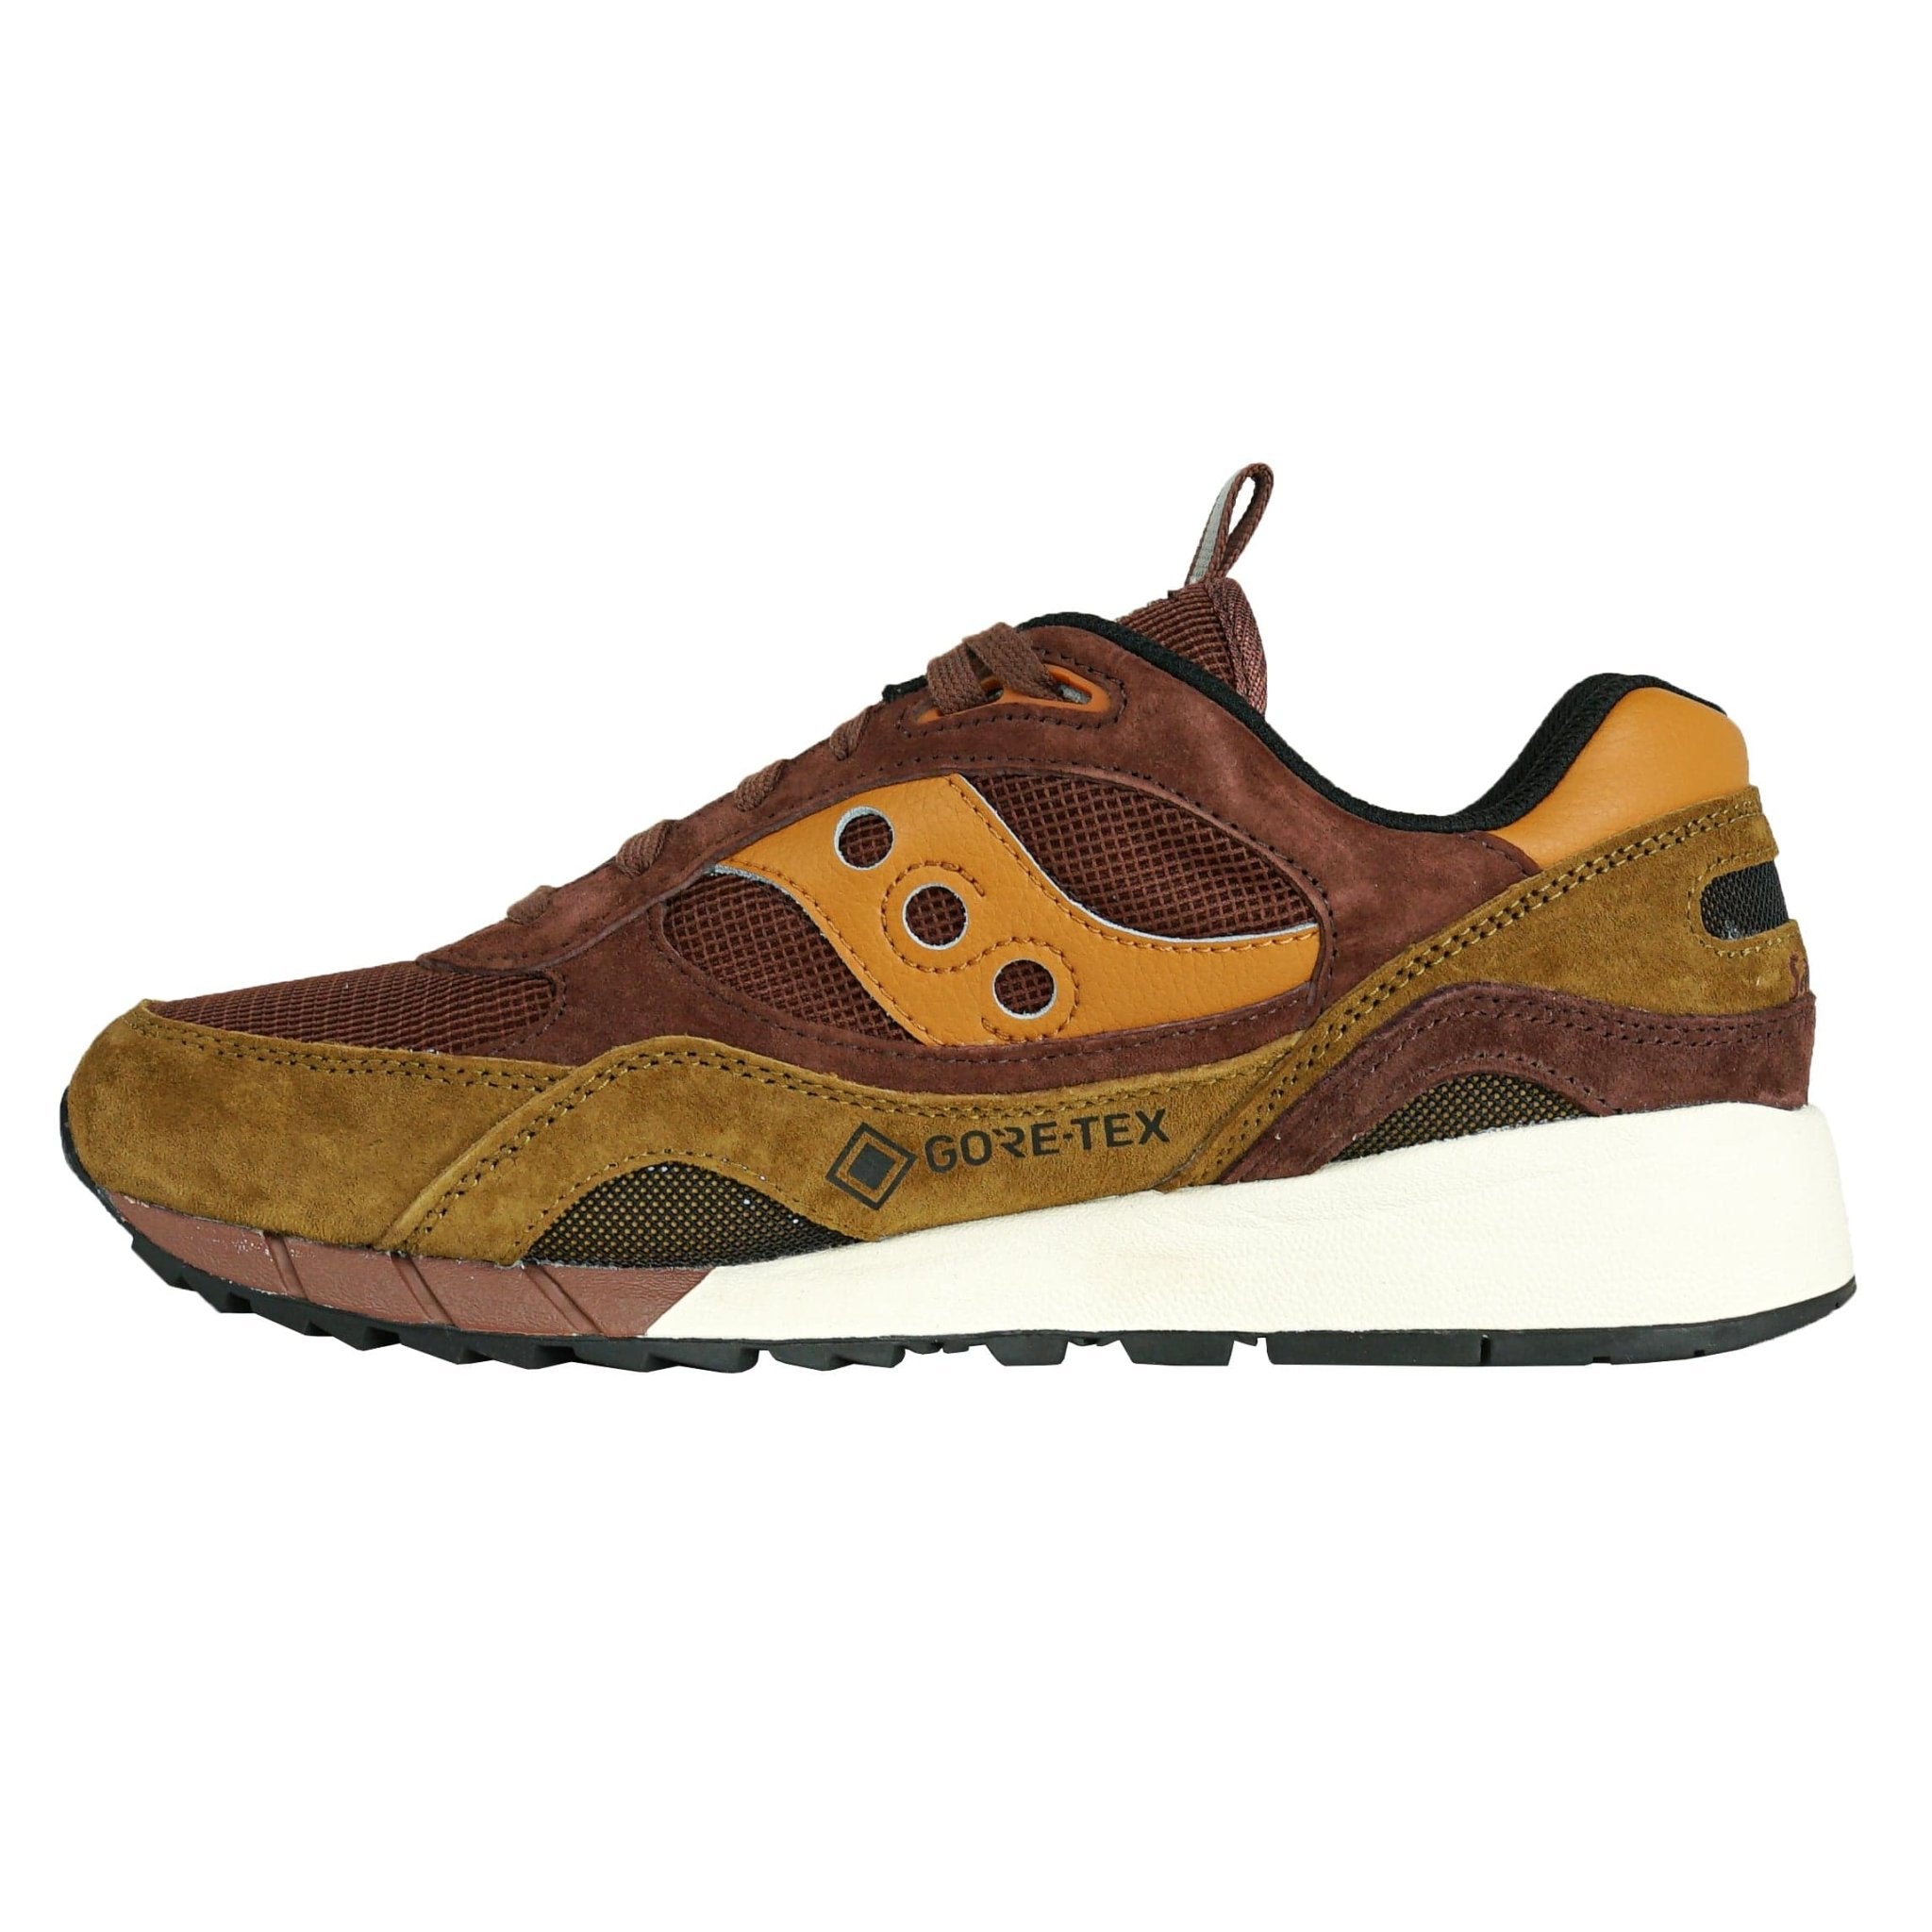 Shadow 6000 GTX in brown - Saucony - State Of Flux